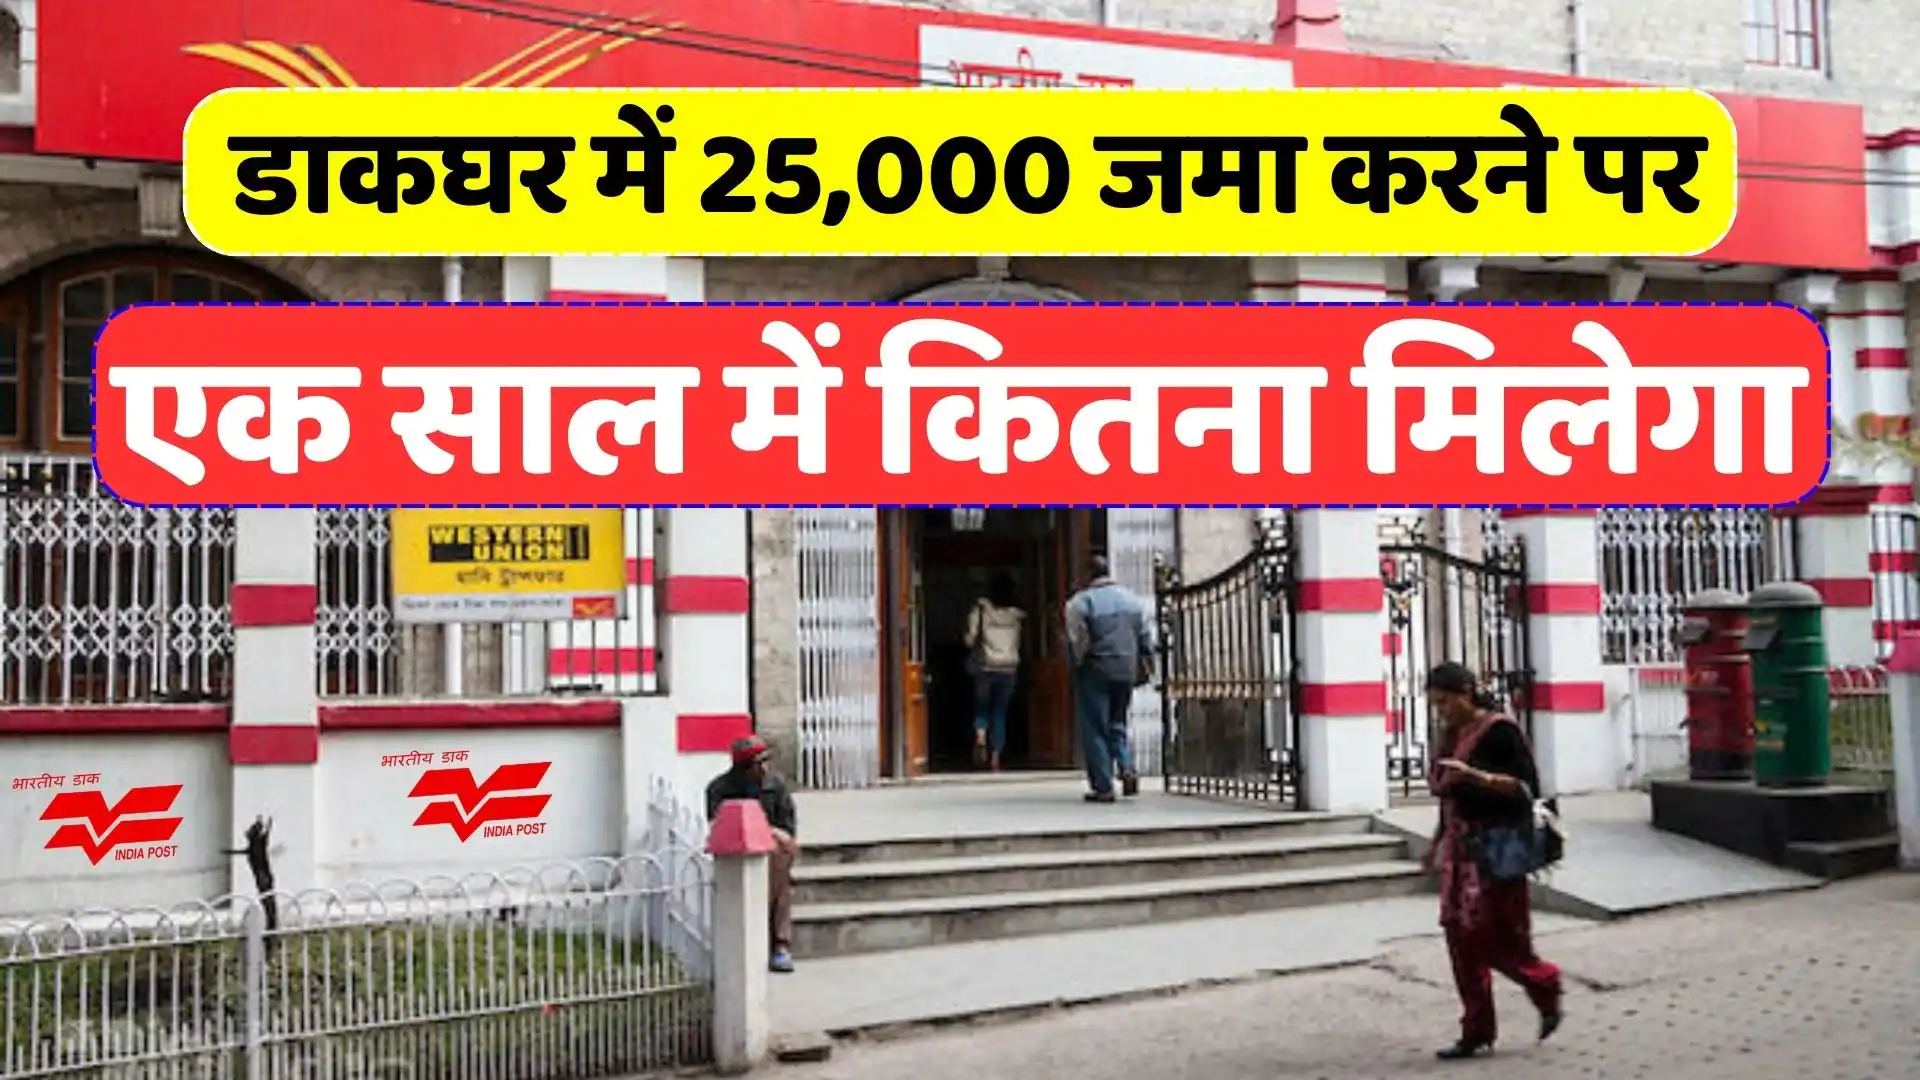 Post Office Scheme How much will you get in a year by depositing Rs 25,000 in the post office, see calculation